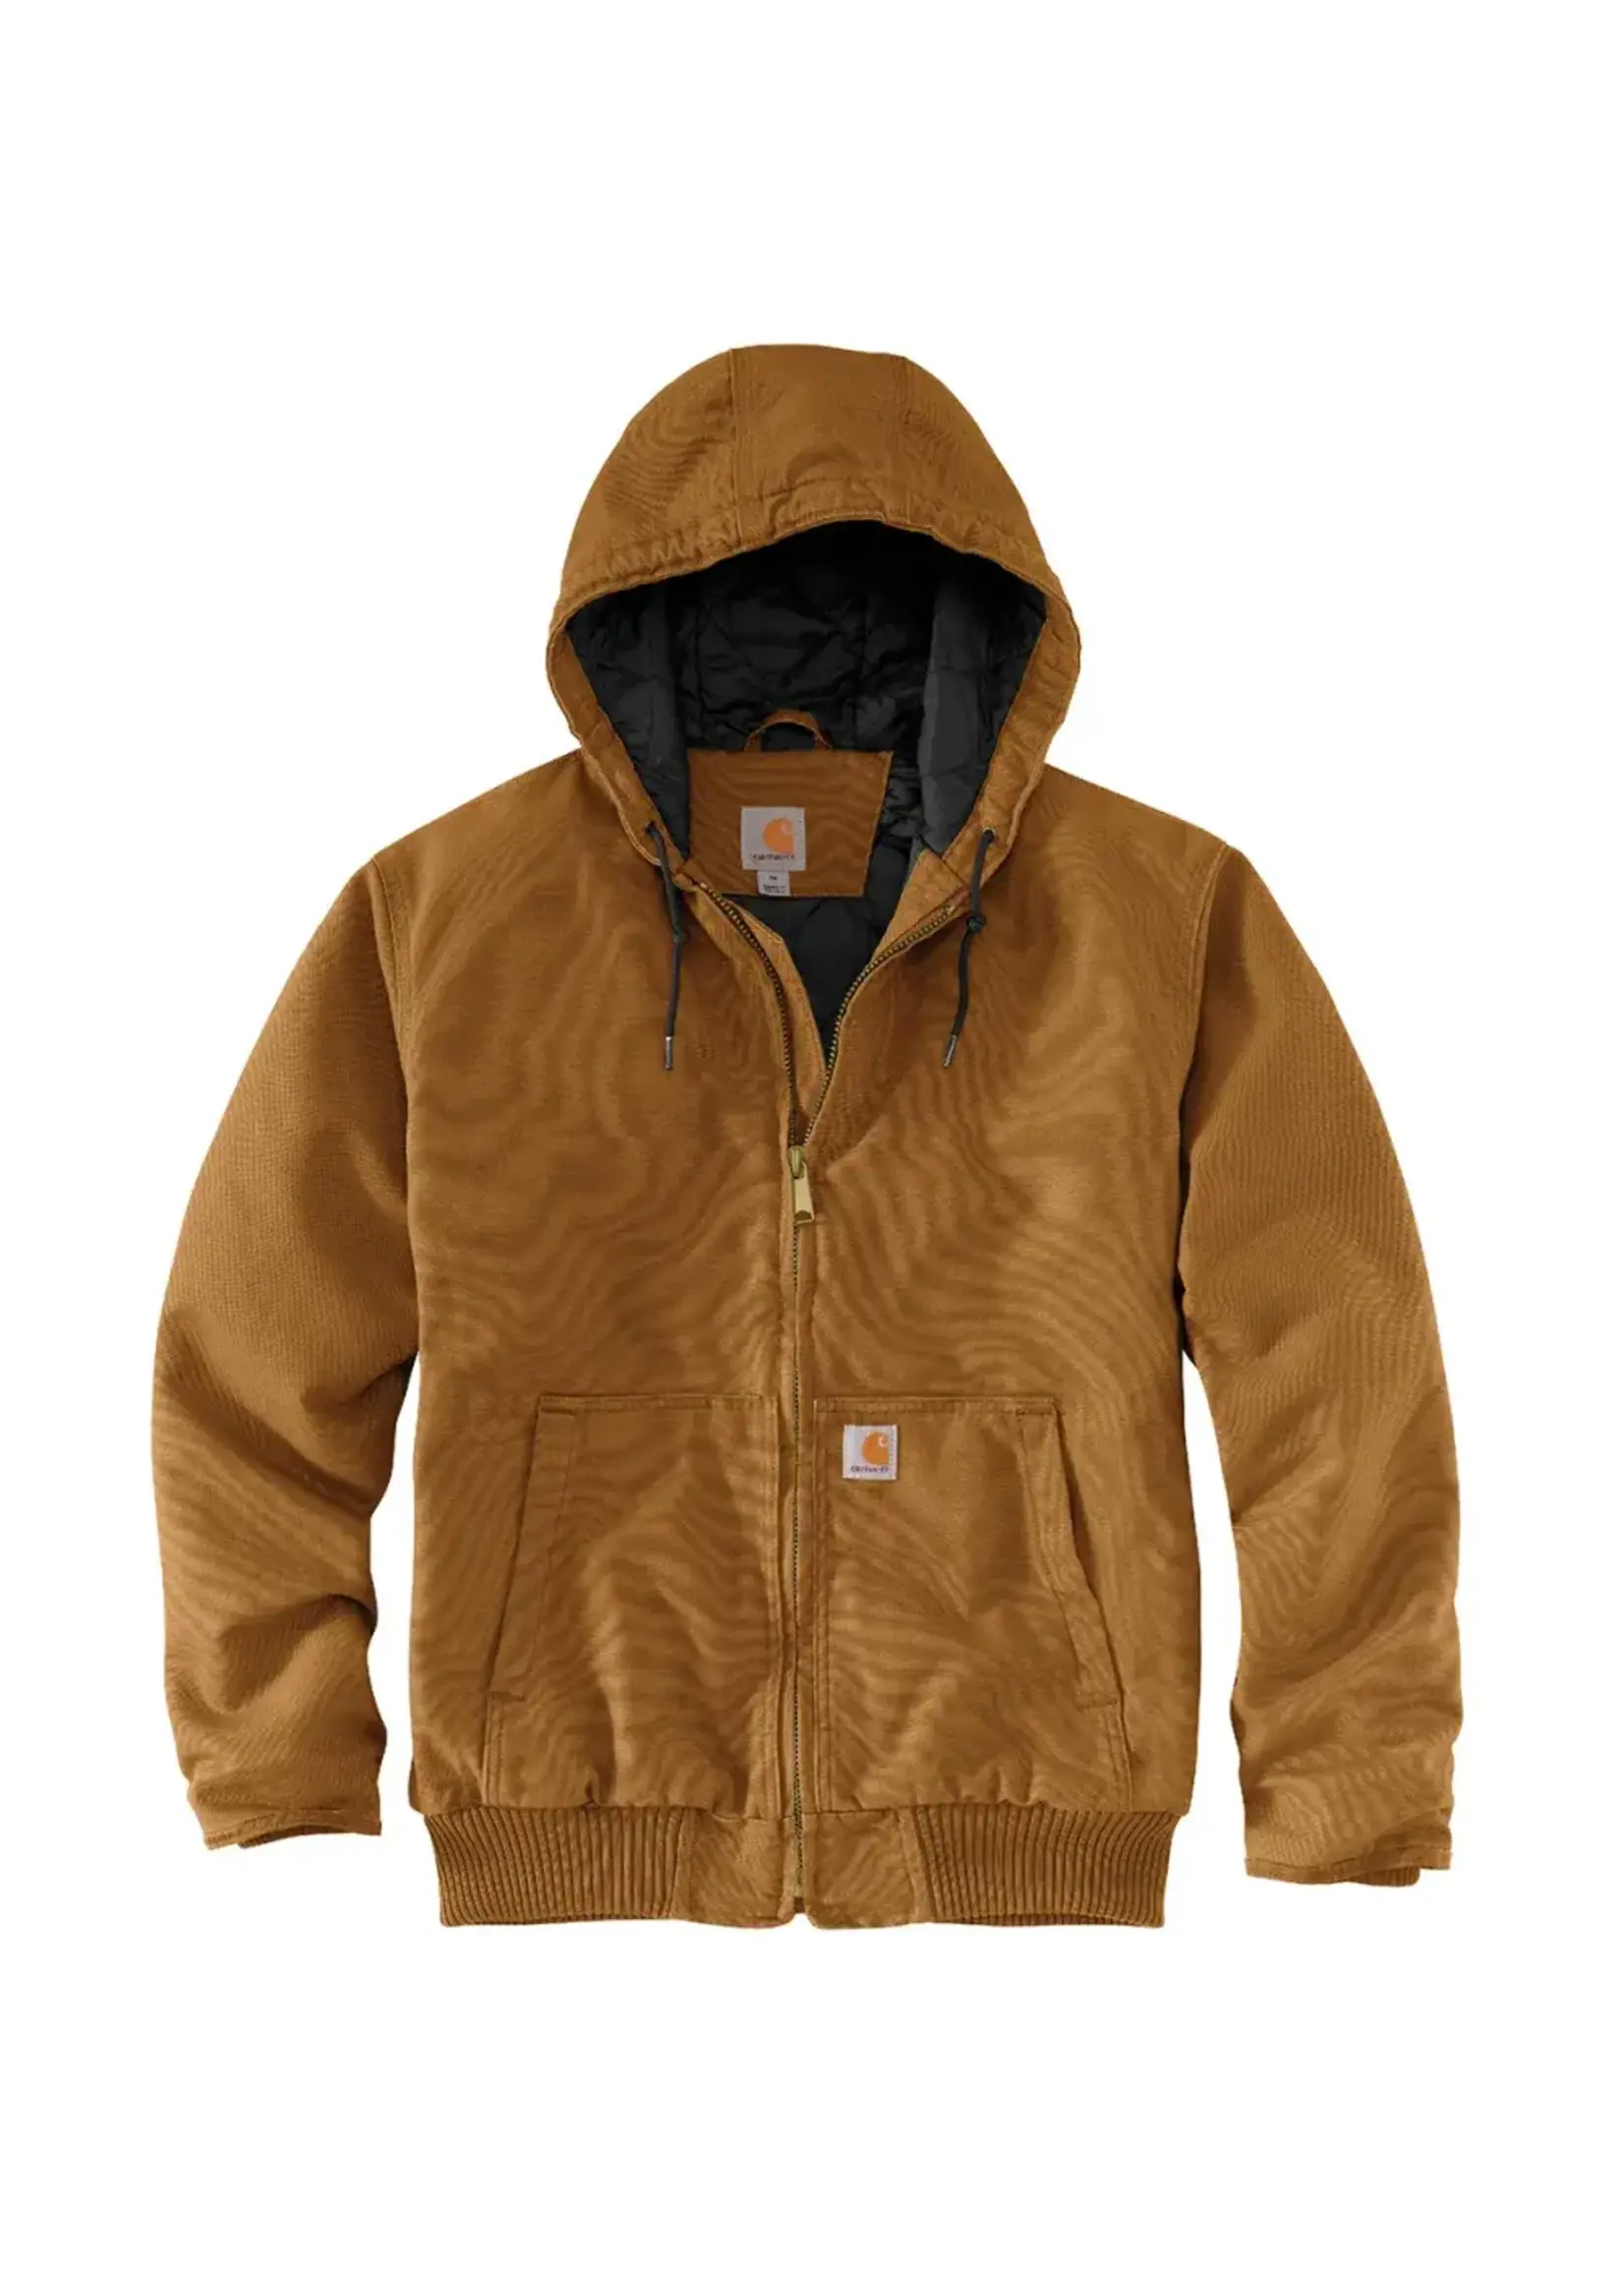 Carhartt Loose Fit Washed Duck Insulated Active Jac - 3 Warmest Rating - Big